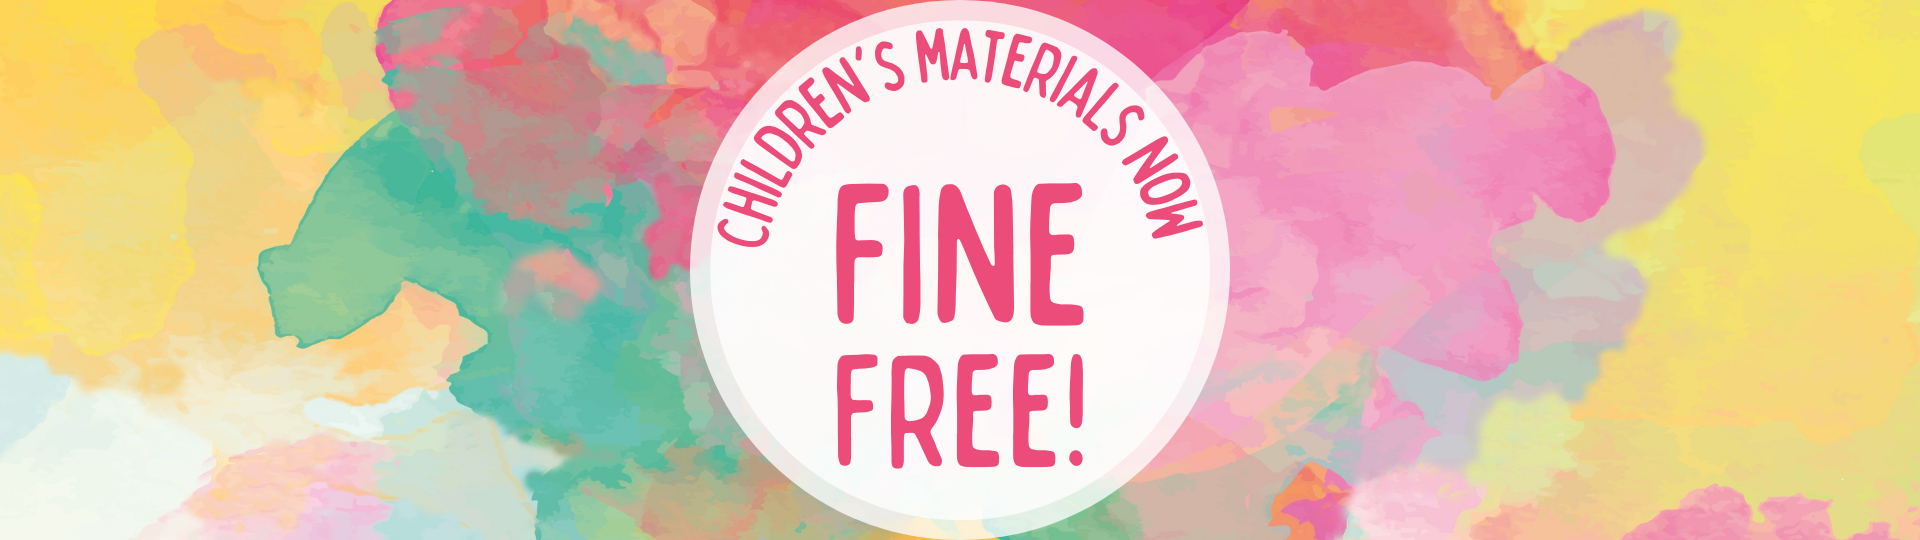 colourful banner with the words CHILDREN'S MATERIALS NOW FINE FREE